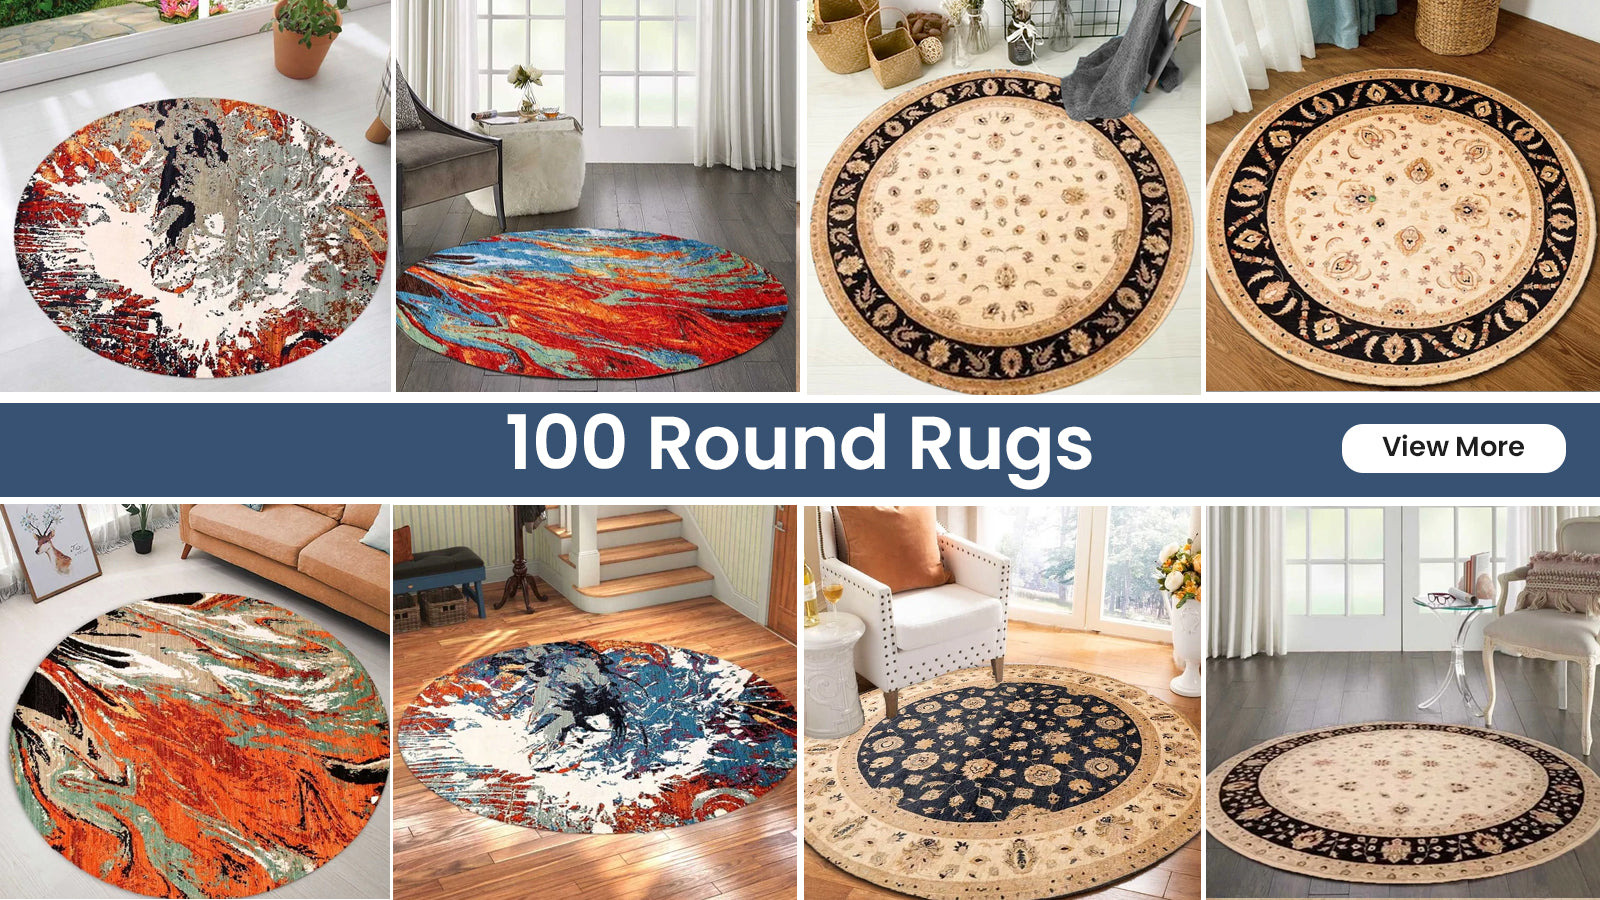 When / Where / How To Use Round Rug?